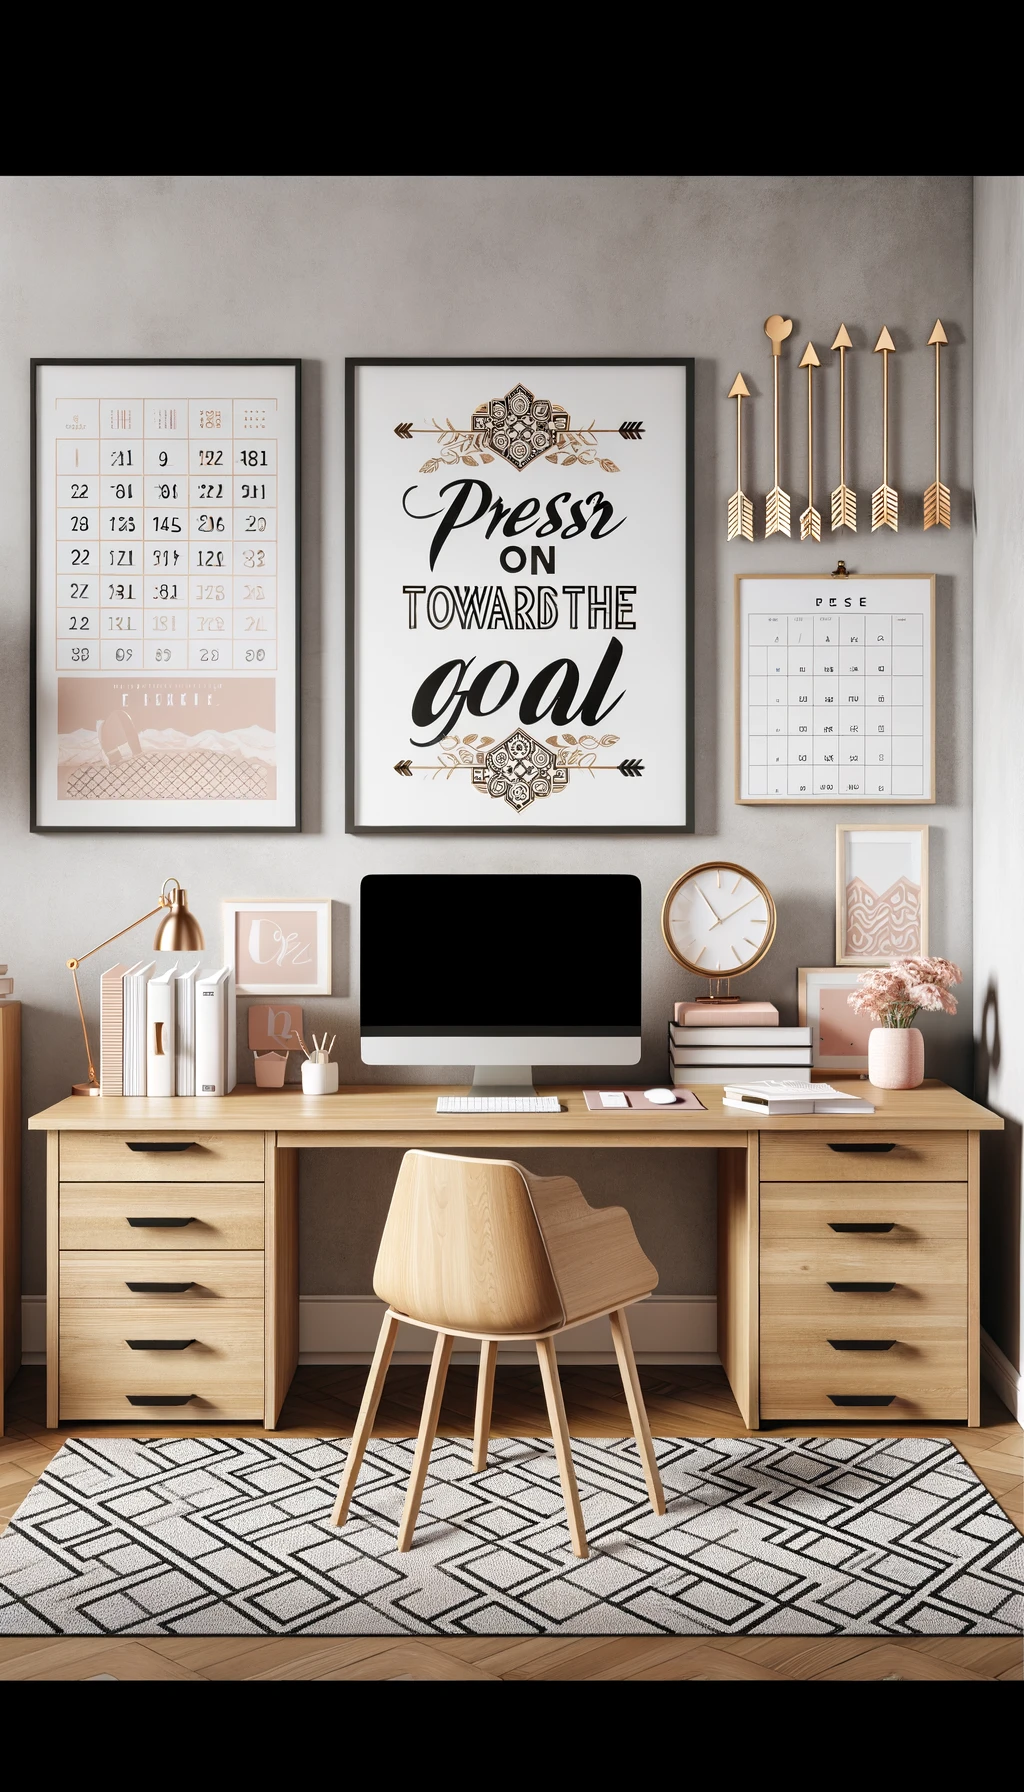 Motivational office with a quote wall art.